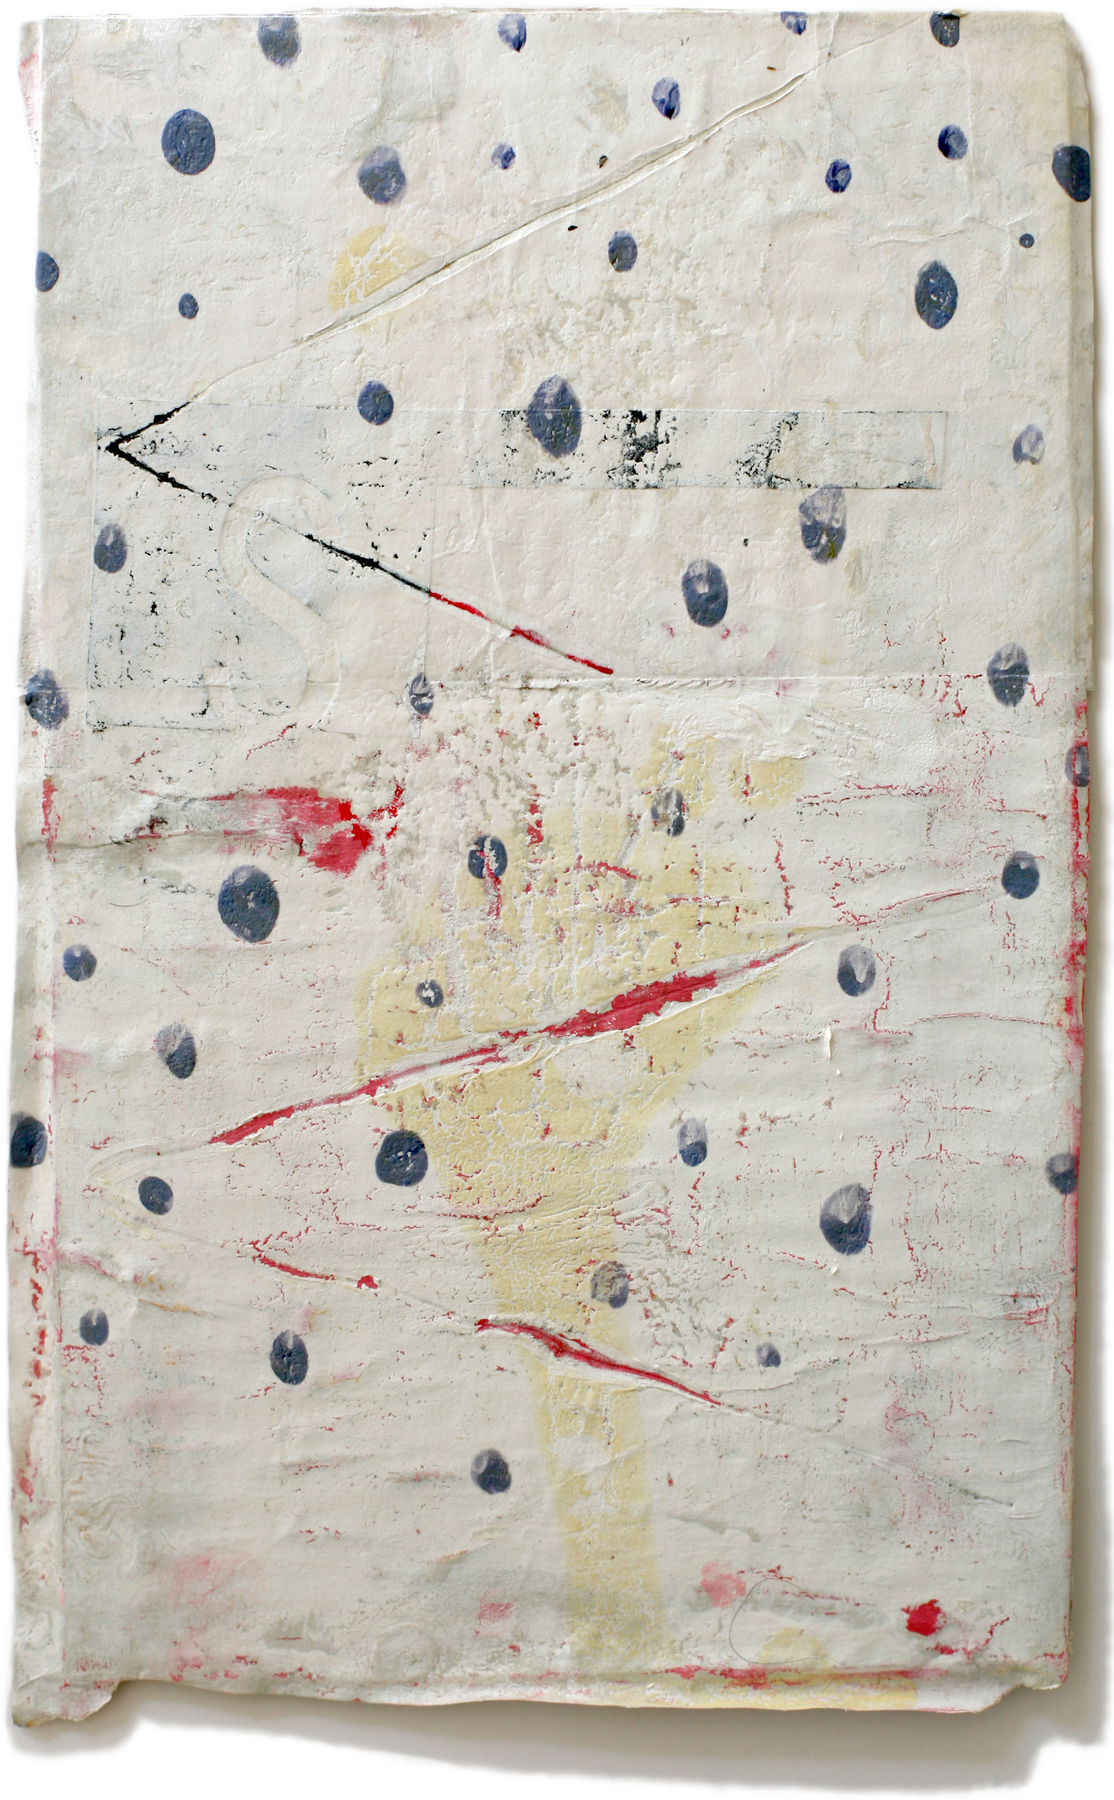 Blue Dot, 10" x 6", 2011 (private collection)